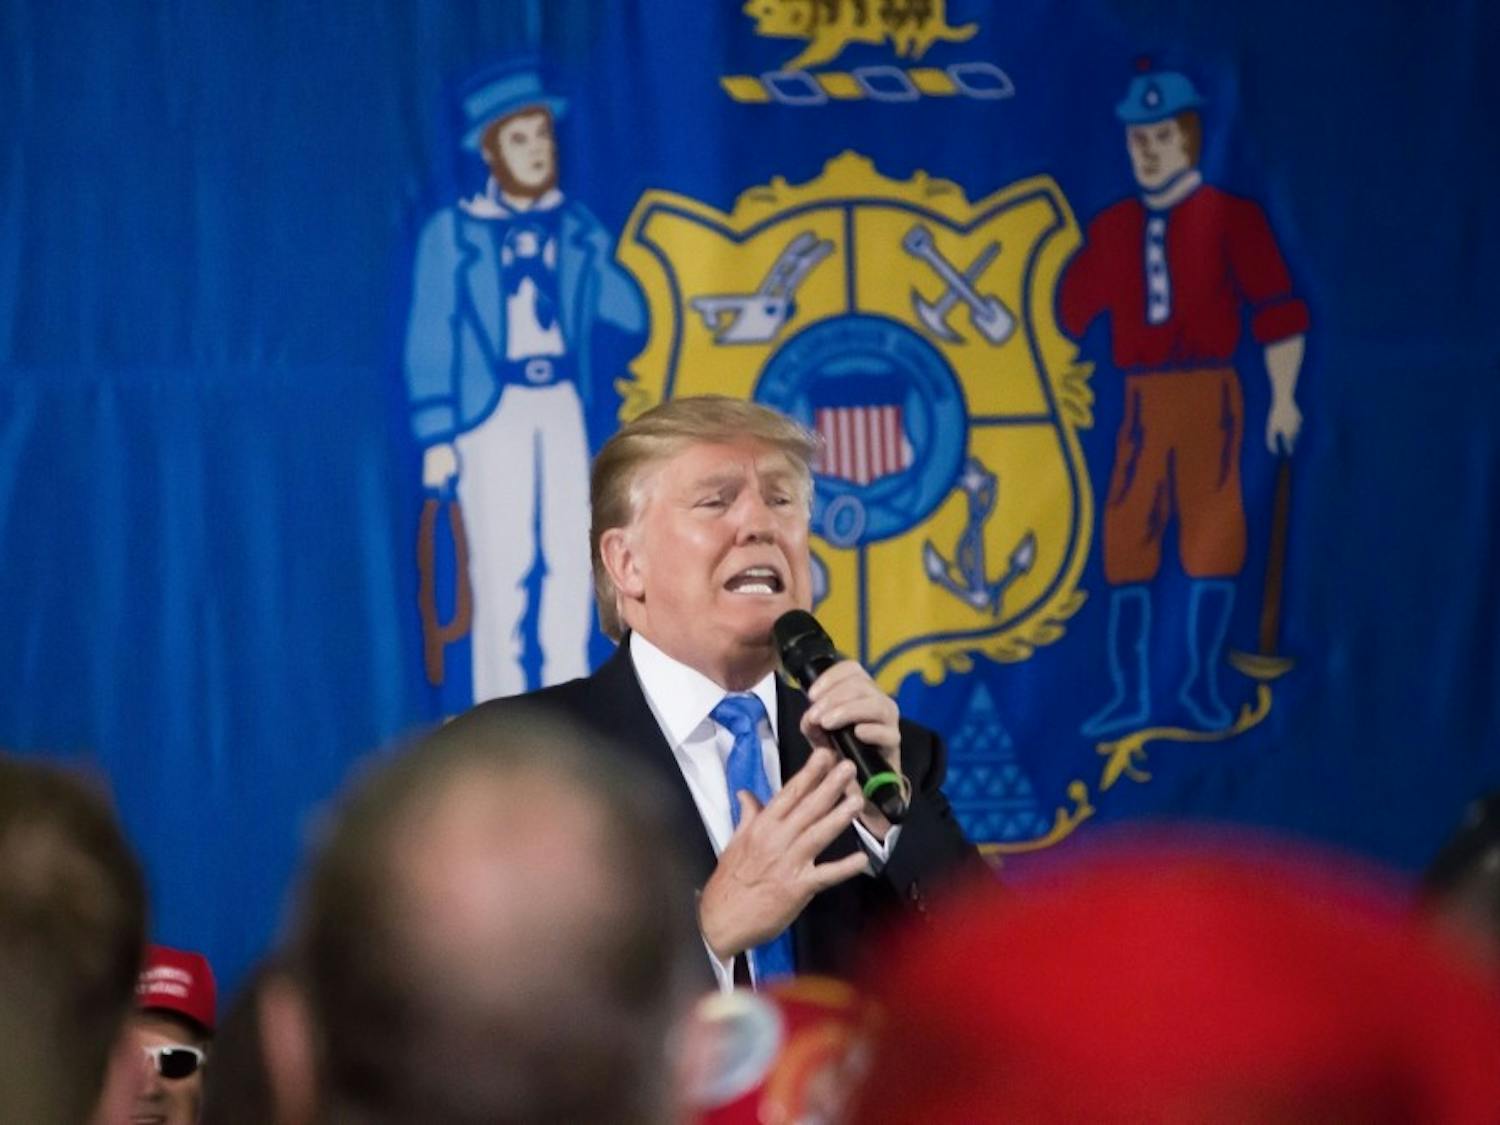 Mixed reactions from Wisconsin Republicans have continued as Trump was disinvited from an event in Elkhorn Saturday.